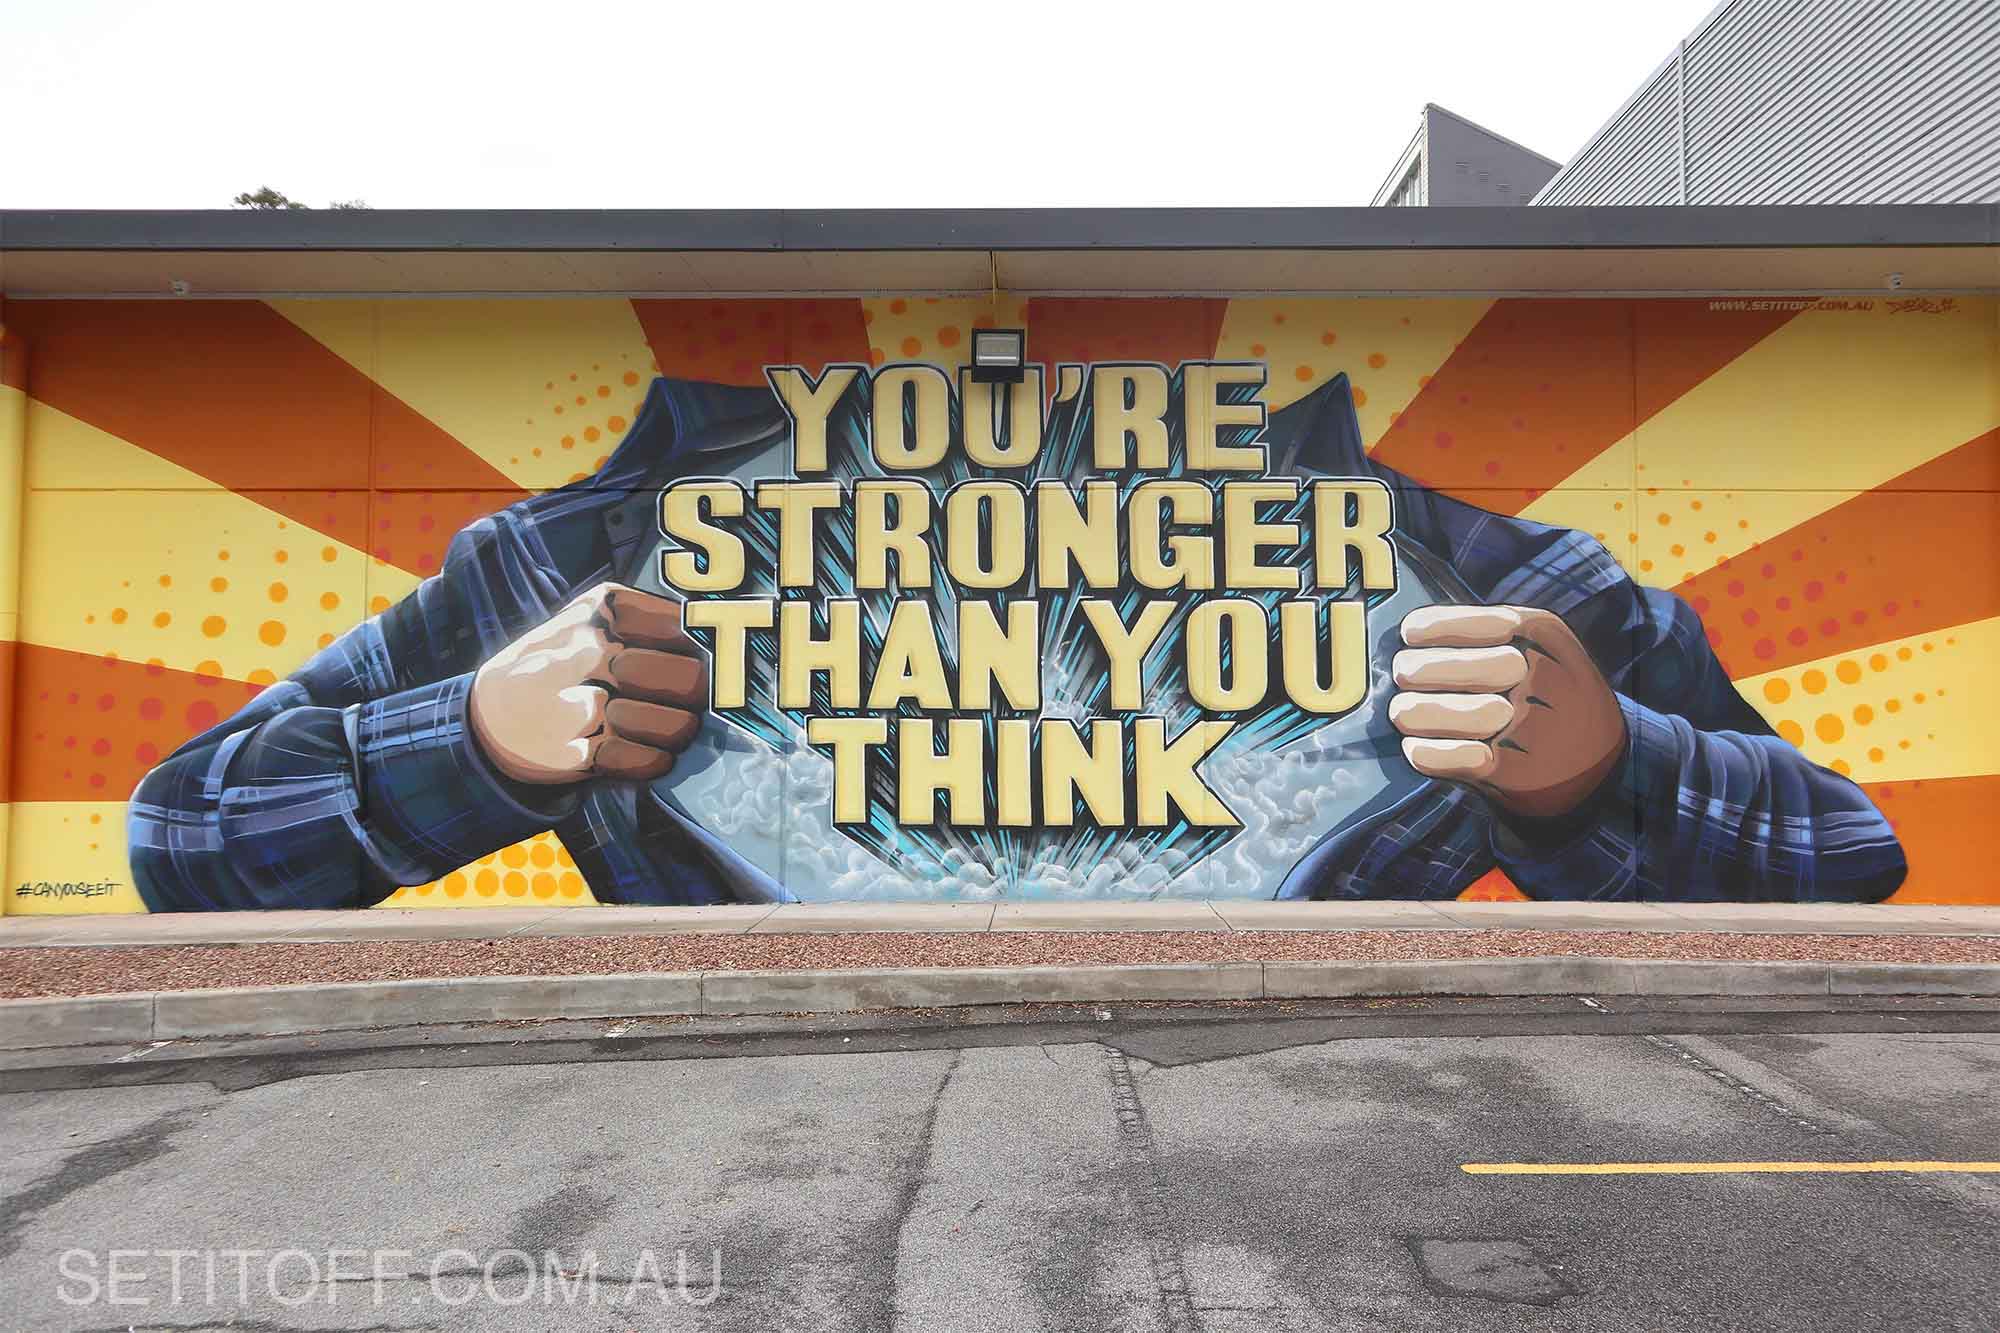 Motivational quote on a graffiti mural